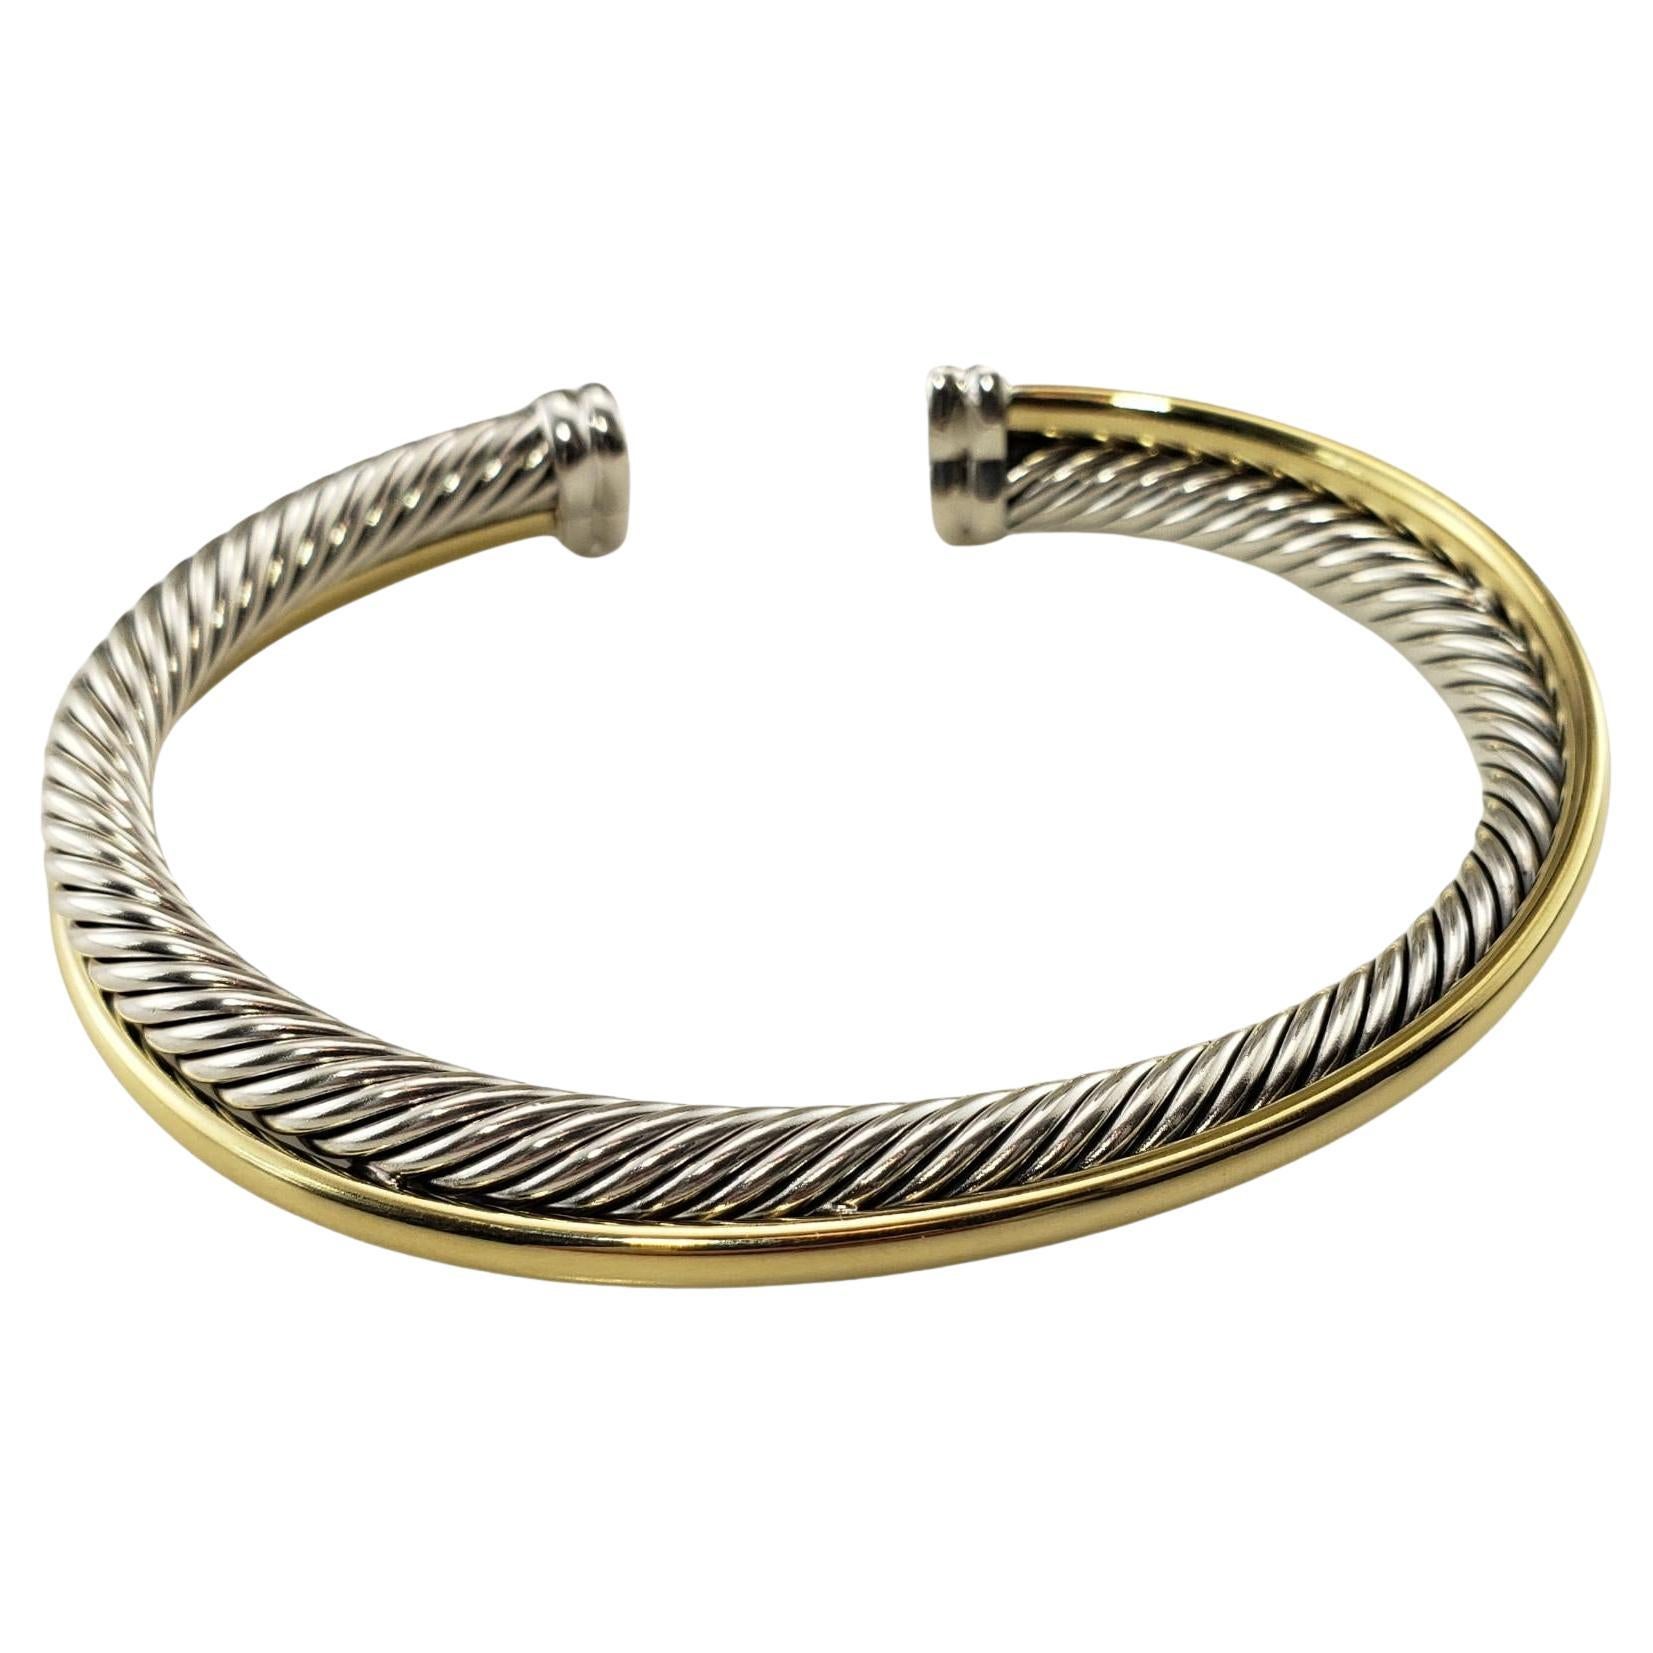 David 18K Yellow Gold Plated and Sterling Silver Cuff Bracelet #15415